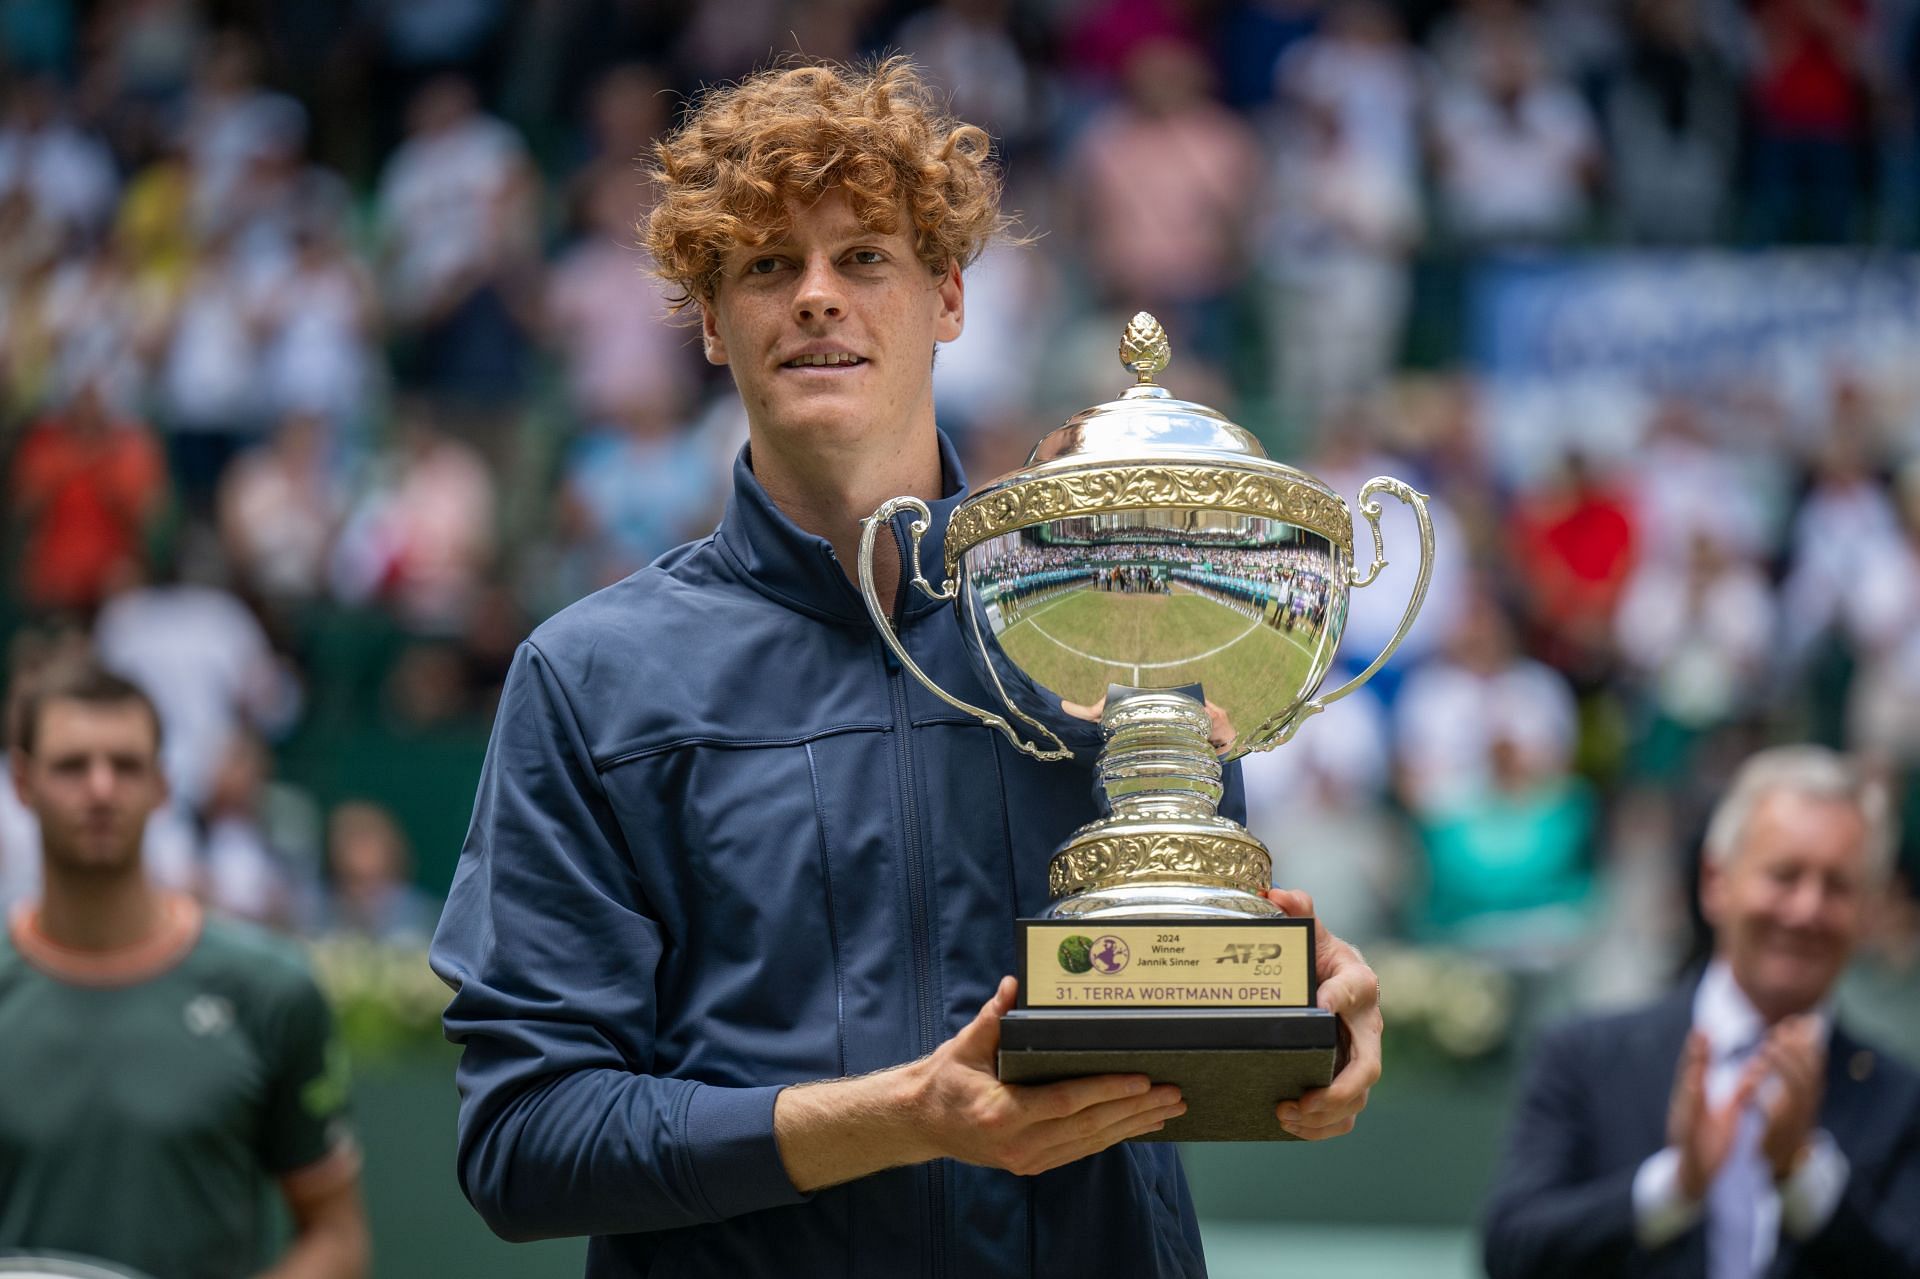 Jannik Sinner won his first title as World No. 1 at the Halle Open